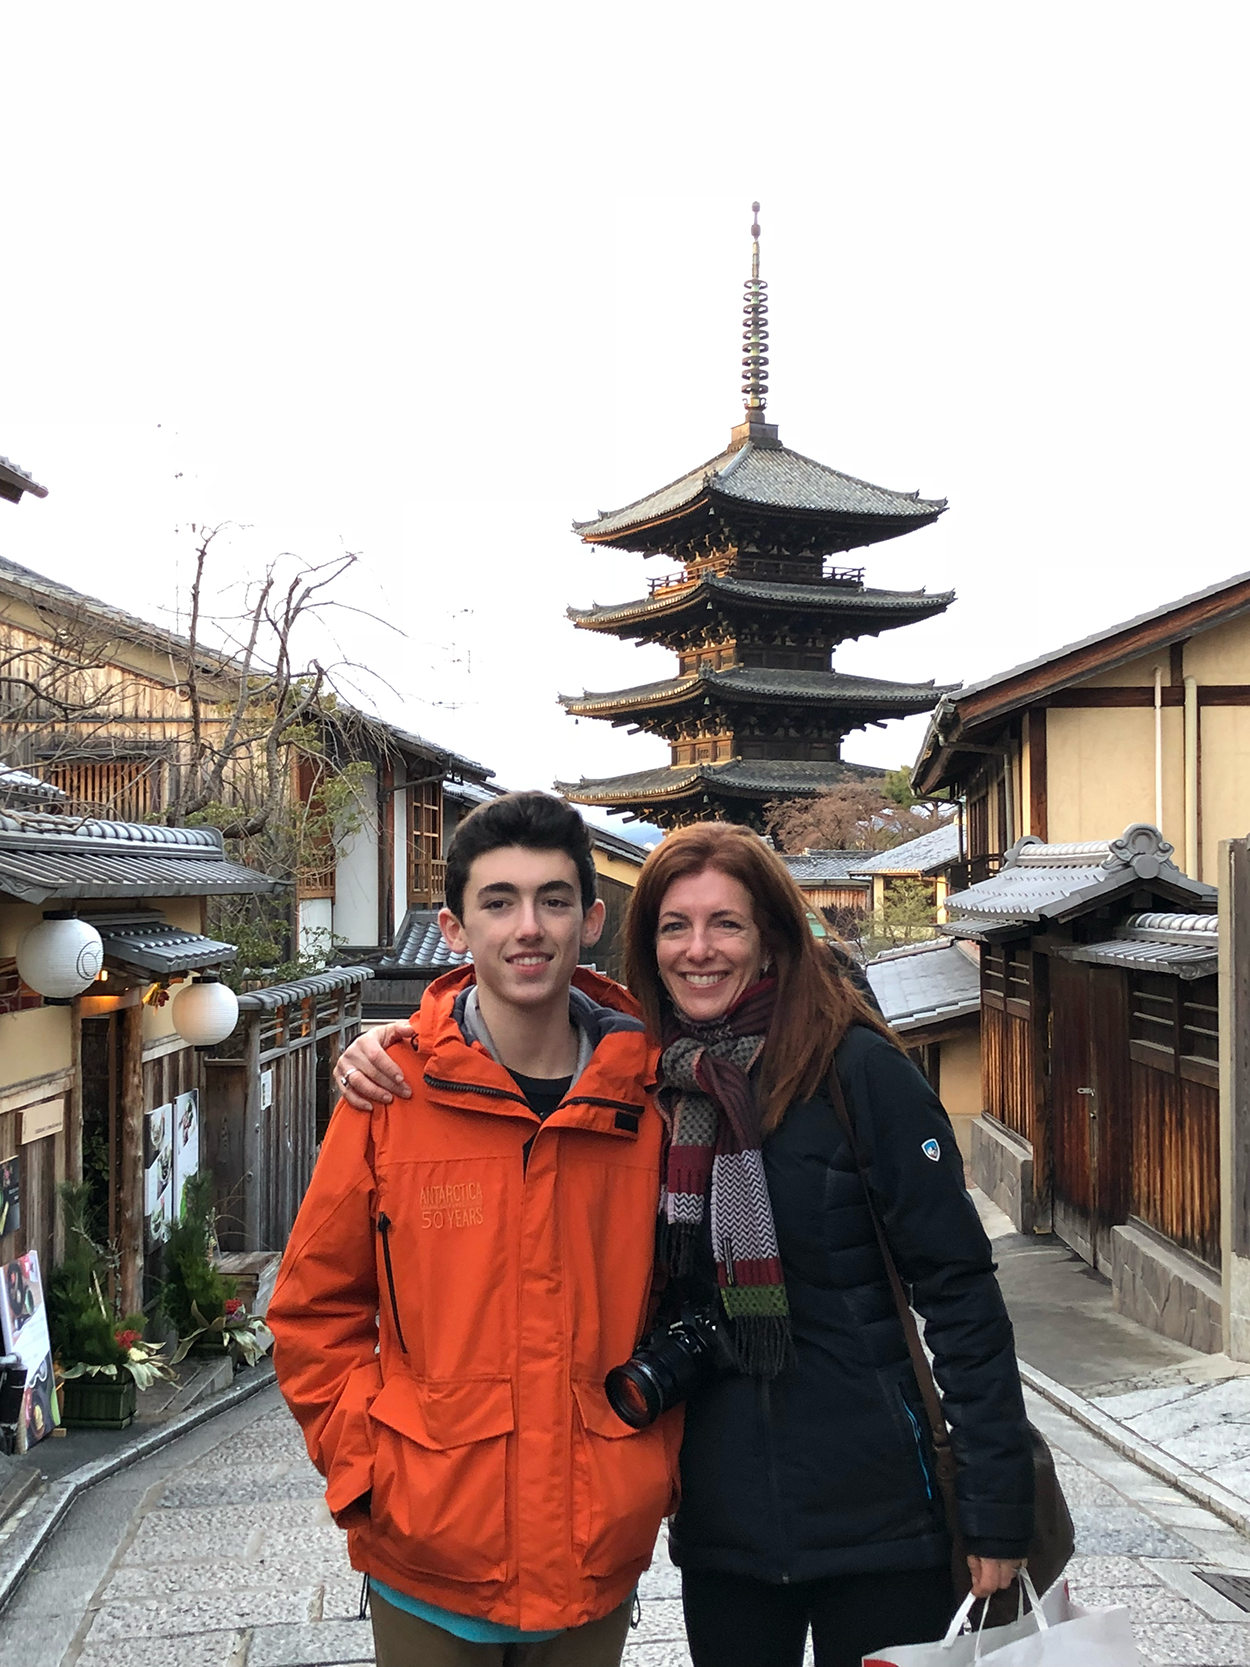 Amie and her son in Japan- credit Amie O